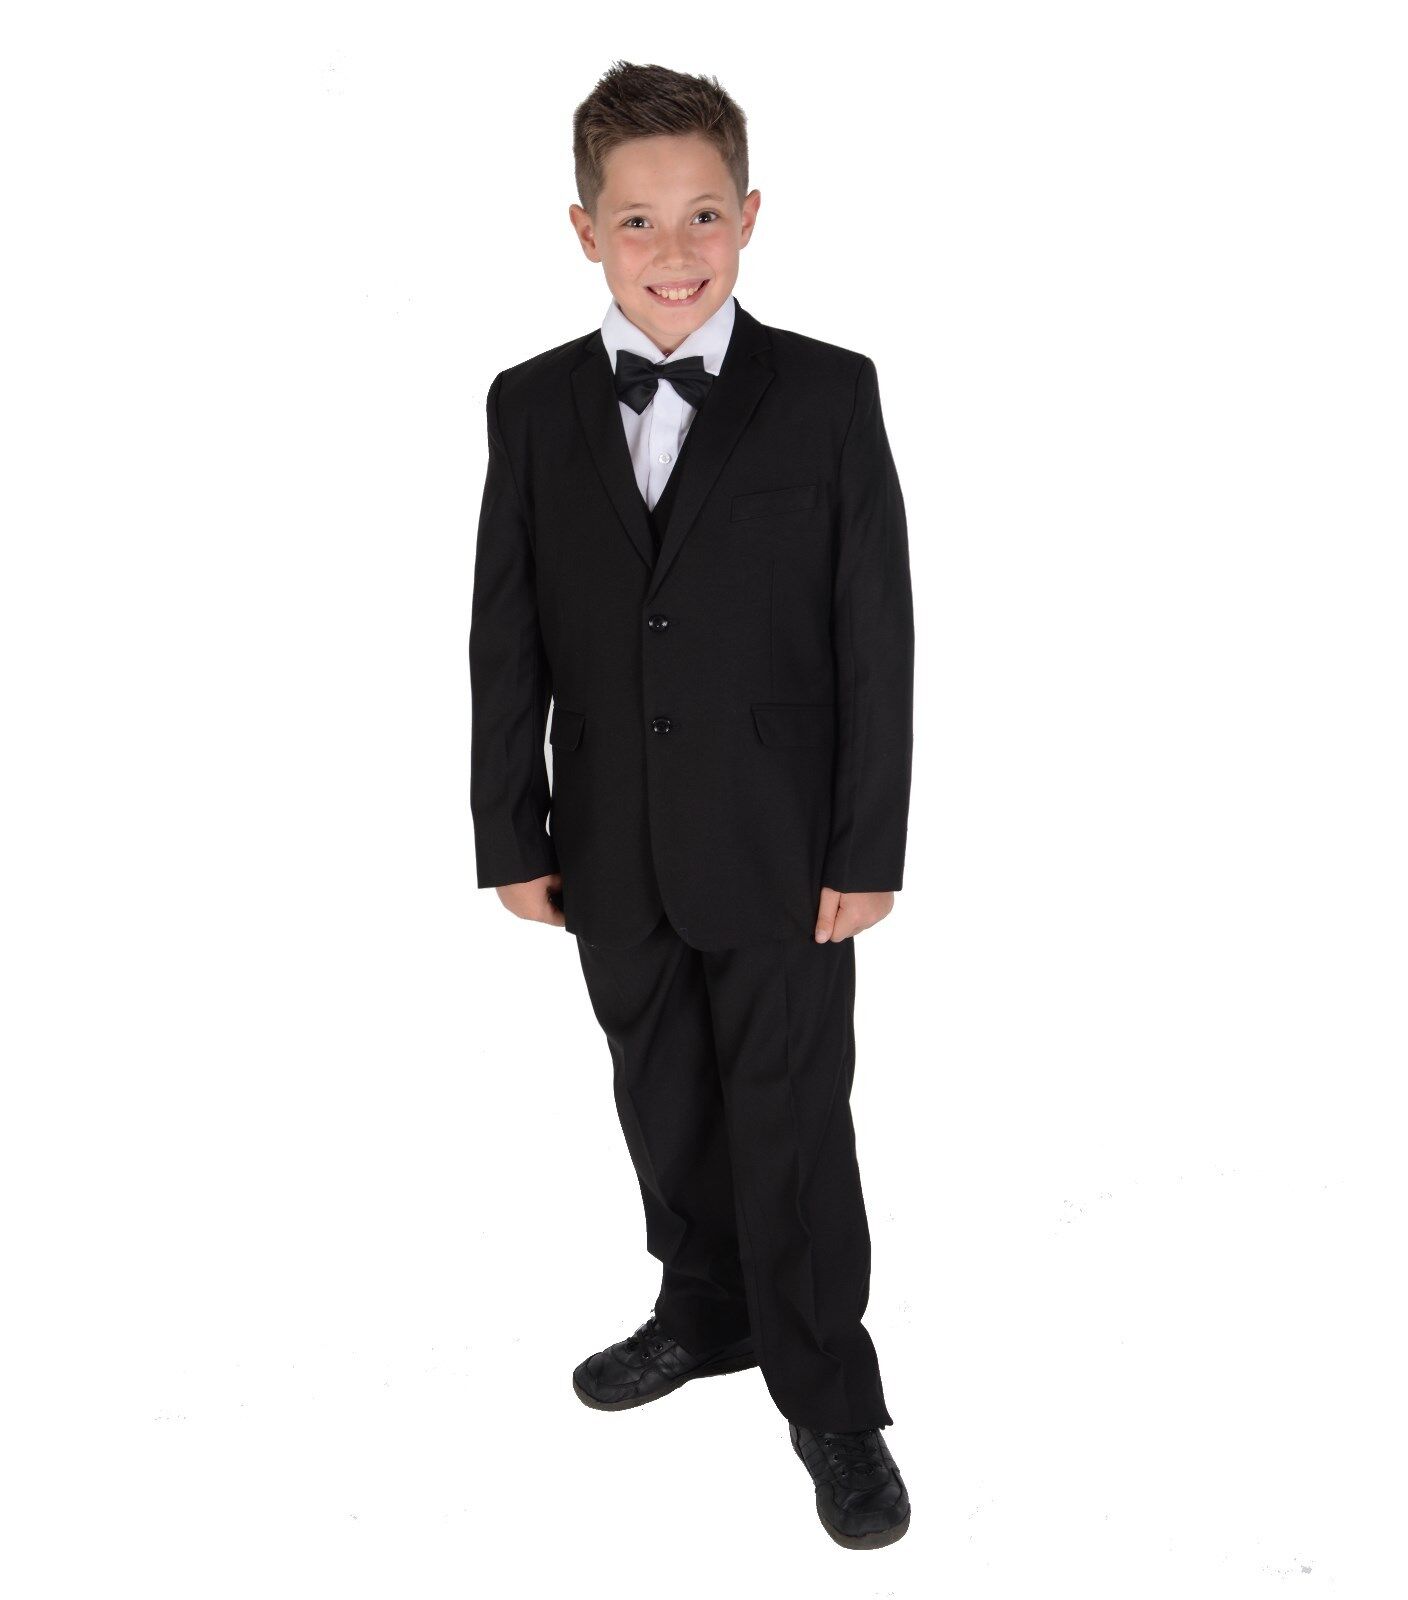 Toddler Suits for Boys Tuxedo Suit Boys' Ring Bearer Suits Blue check Kids  Wedding Outfit Boys Dress Clothes Dress Up Size 4 - Walmart.com